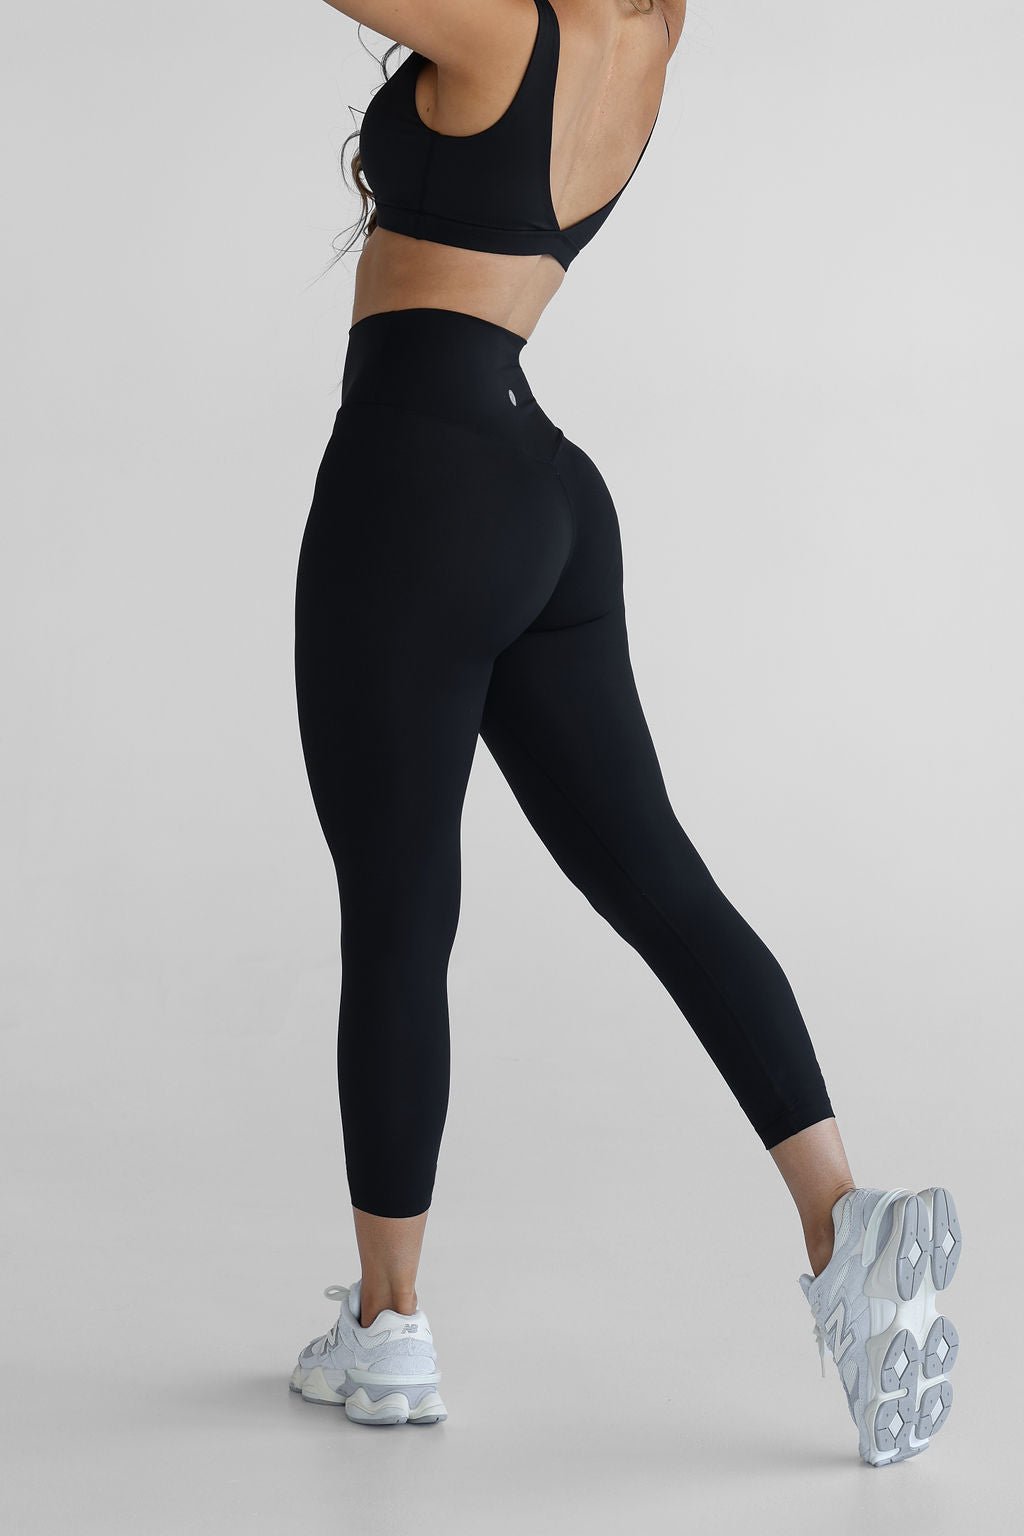 Black 7/8 Leggings, High Waisted, Squat Proof, 5 Star Rated